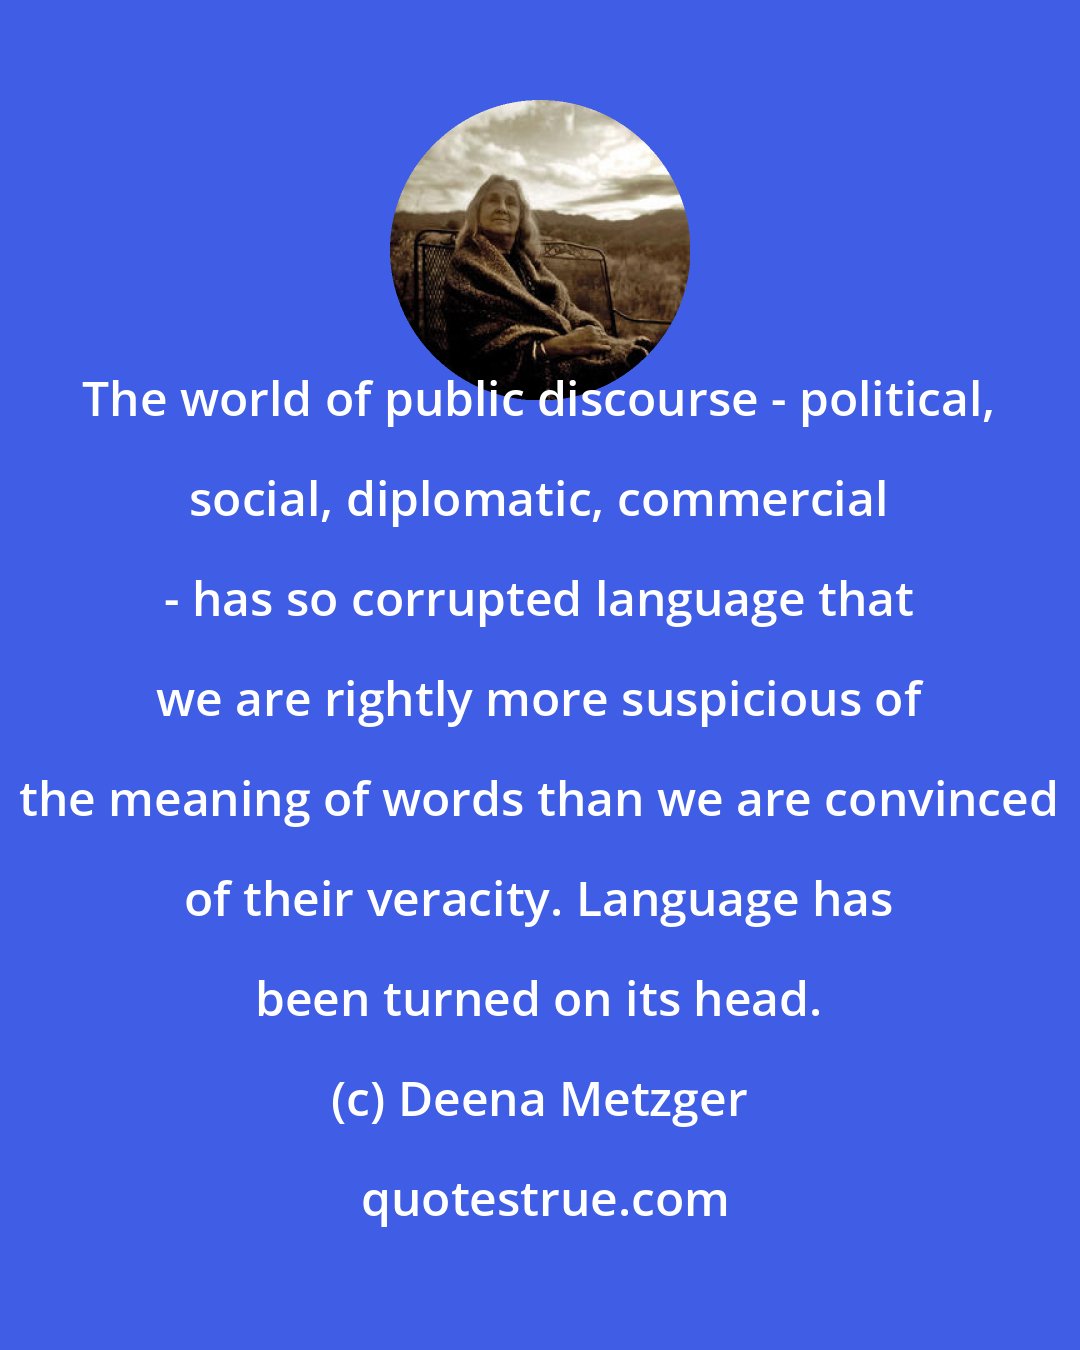 Deena Metzger: The world of public discourse - political, social, diplomatic, commercial - has so corrupted language that we are rightly more suspicious of the meaning of words than we are convinced of their veracity. Language has been turned on its head.